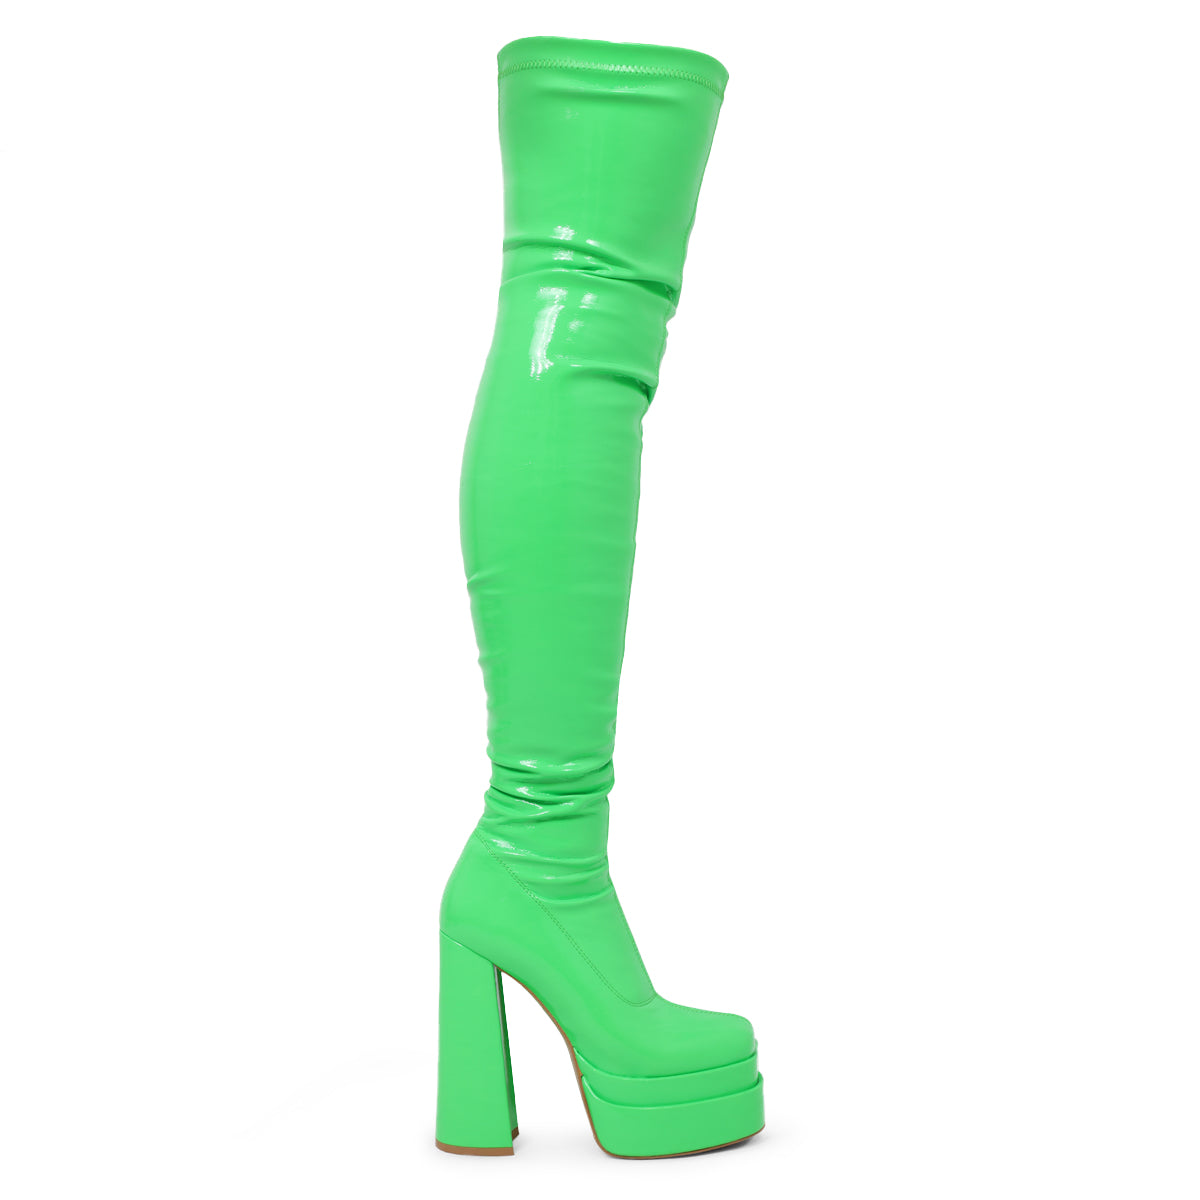 The Redemption Green Stretch Thigh High Boots – KOI footwear